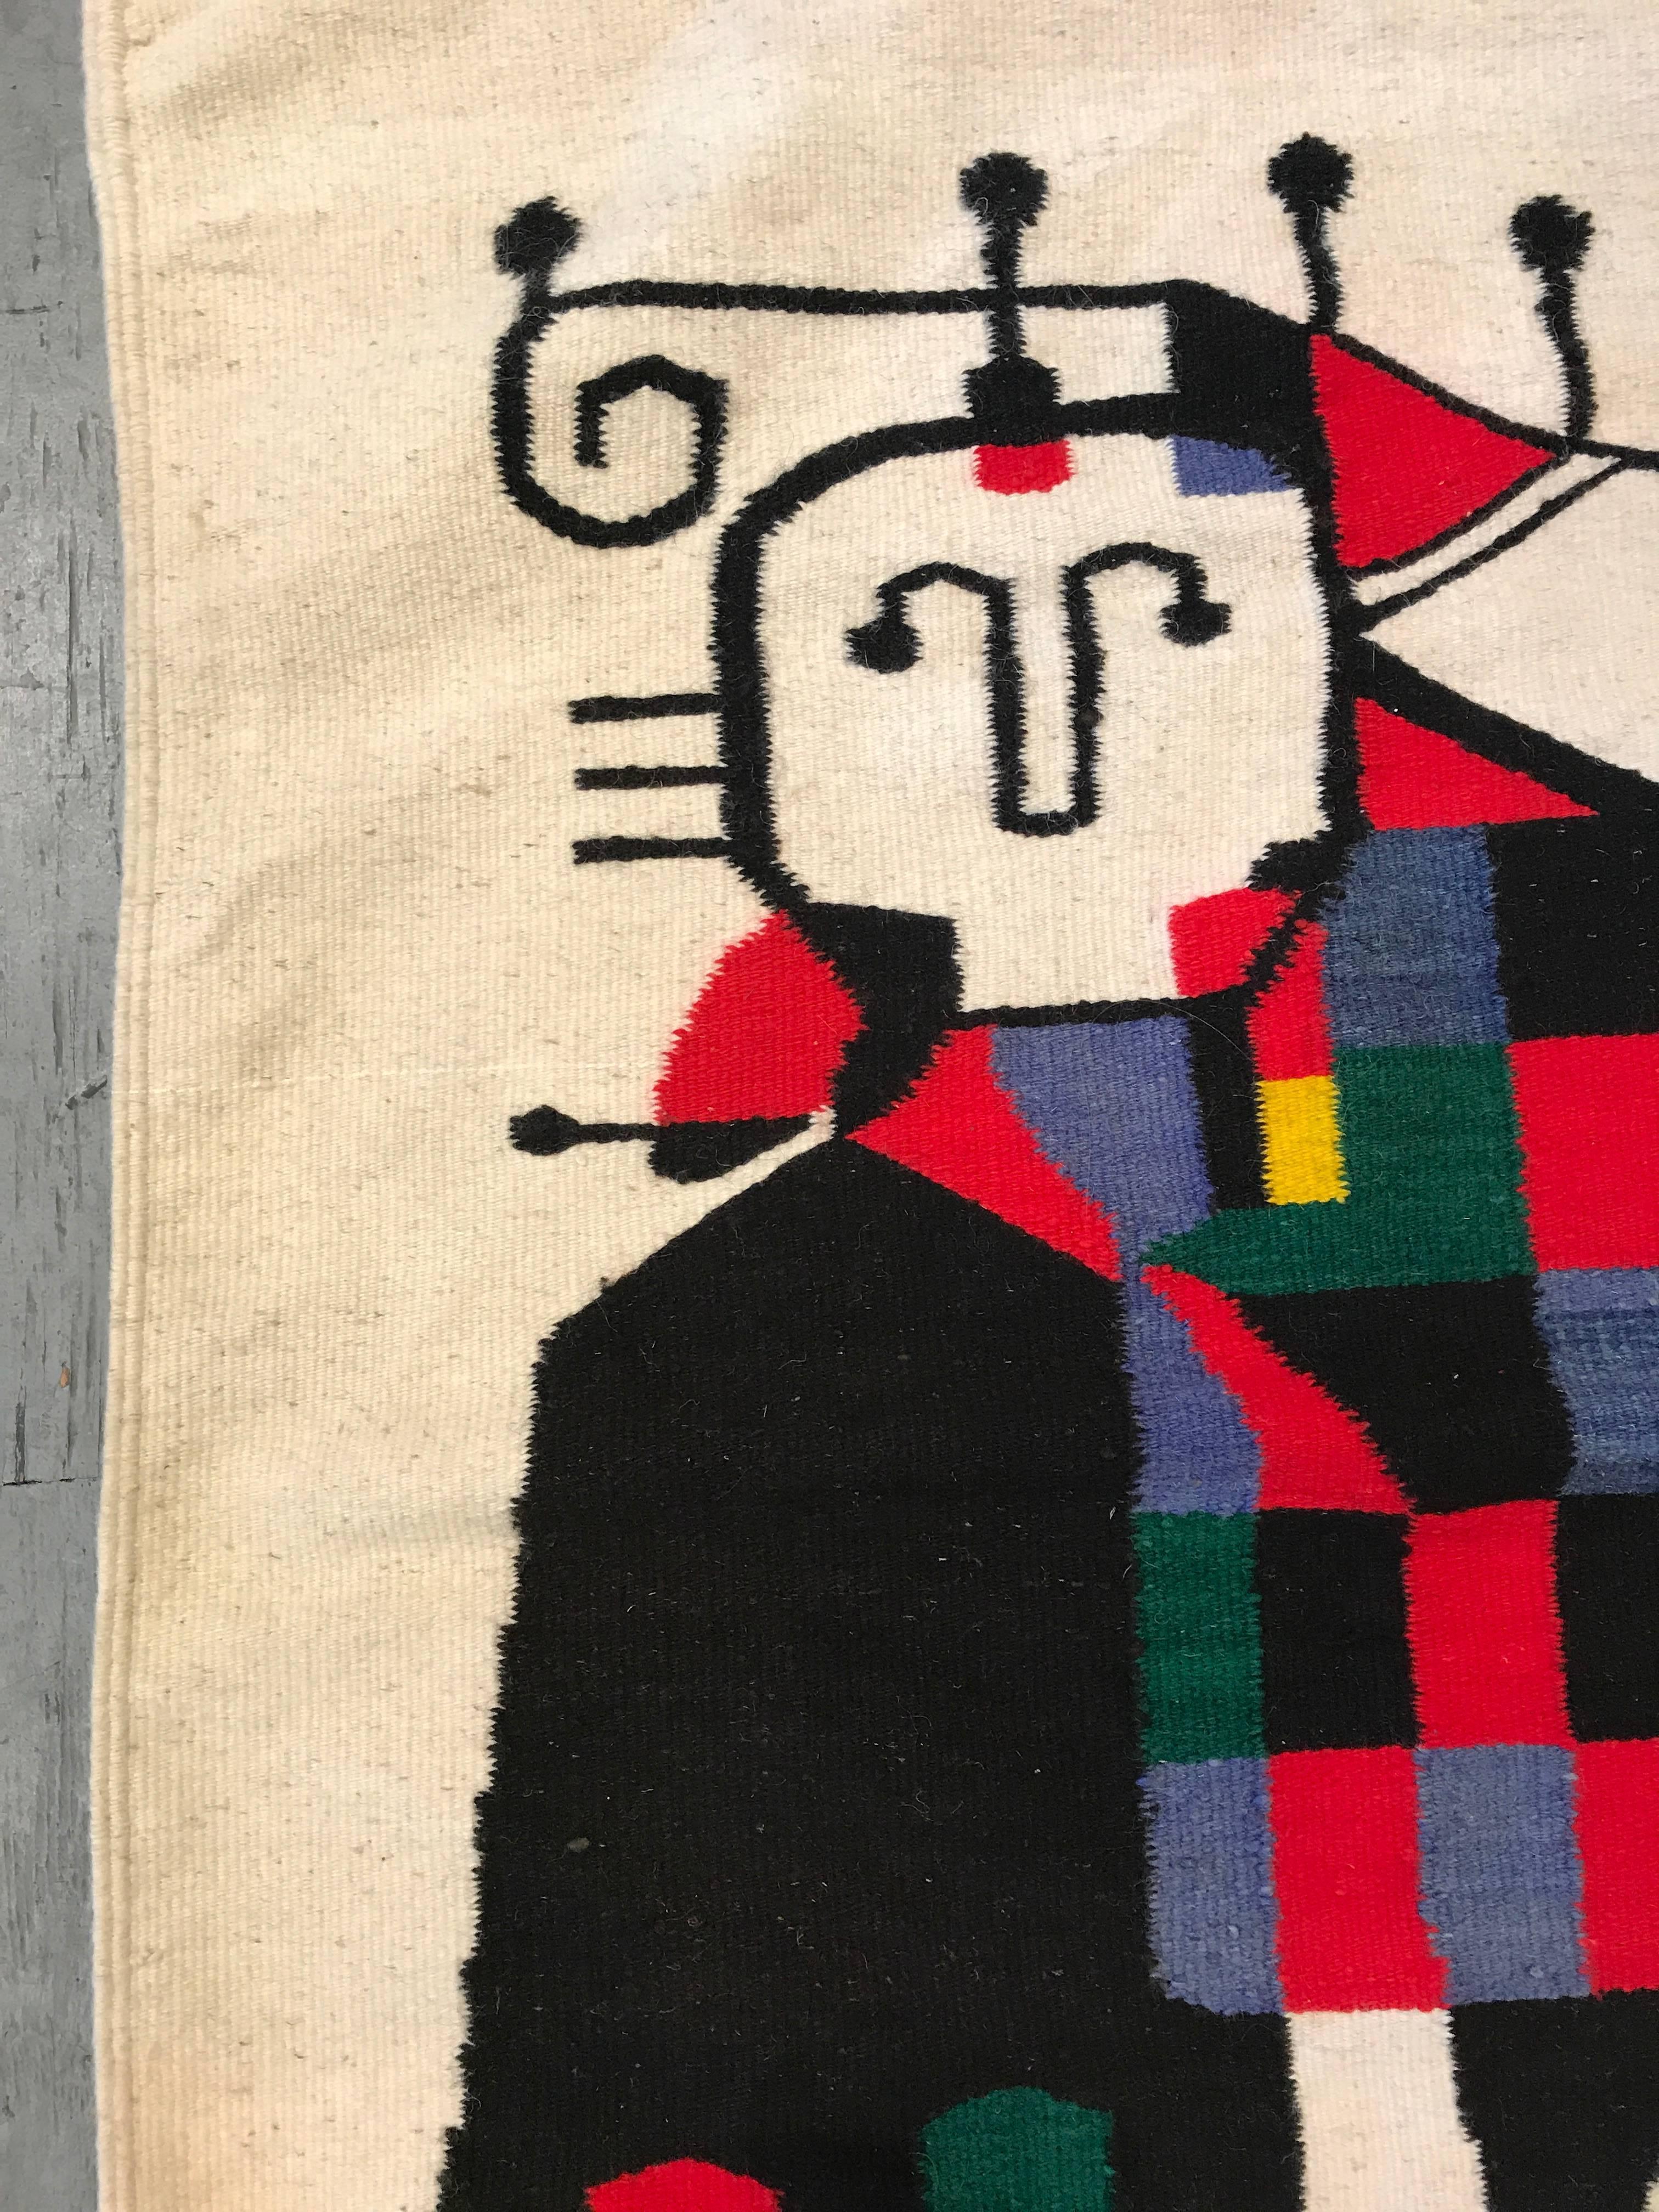 Wall tapestry done in the manner of Joan Miro, wool construction with abstract figures, in black, red, yellow and blue. Handcrafted in wool using natural dyes in its construction.